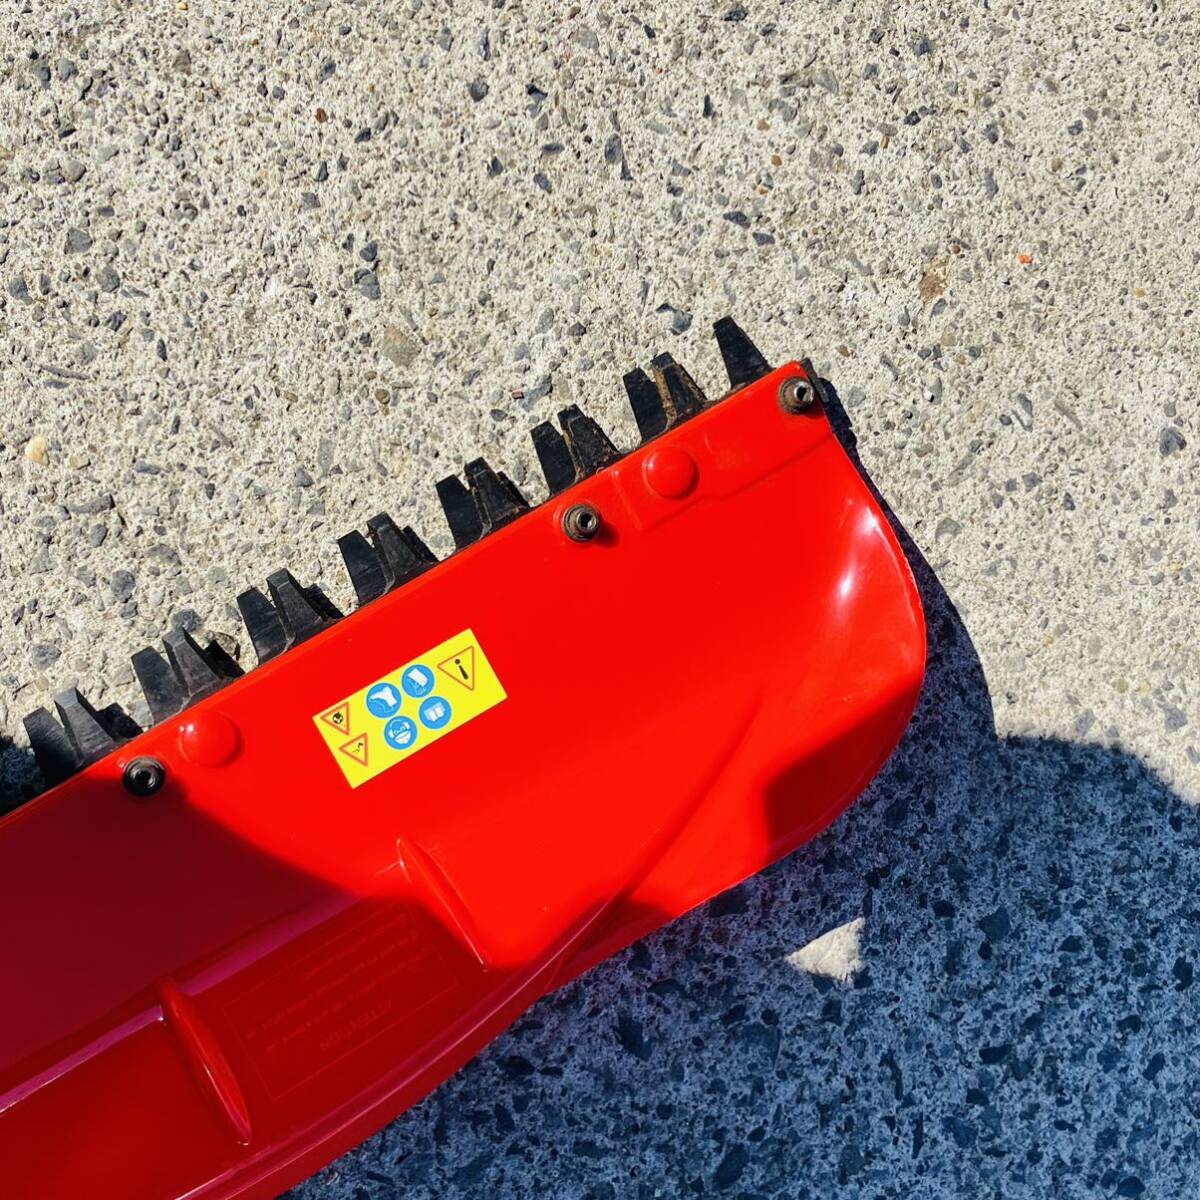  used engine hedge trimmer HT230 abroad made operation verification ending 